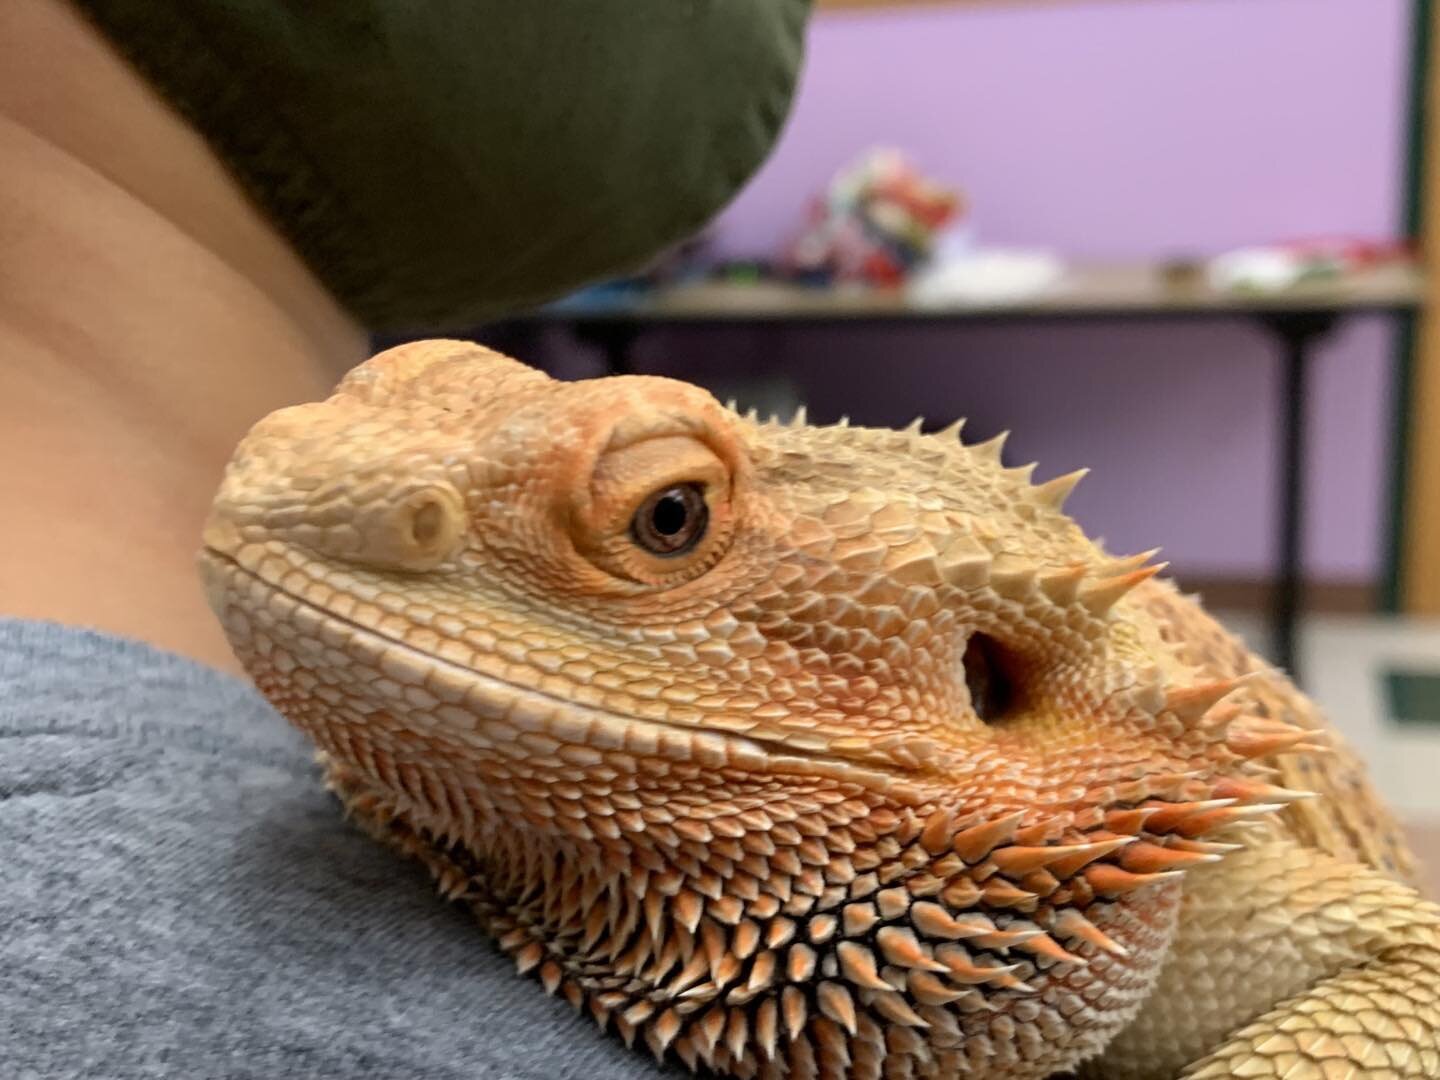 Last year we met this amazing bearded dragon at Dane County Humane Society, but he&rsquo;s an educator and not available for adoption. Cut to me telling the kiddo that we&rsquo;d wait for six months for a surrendered lizard to come into our lives, an